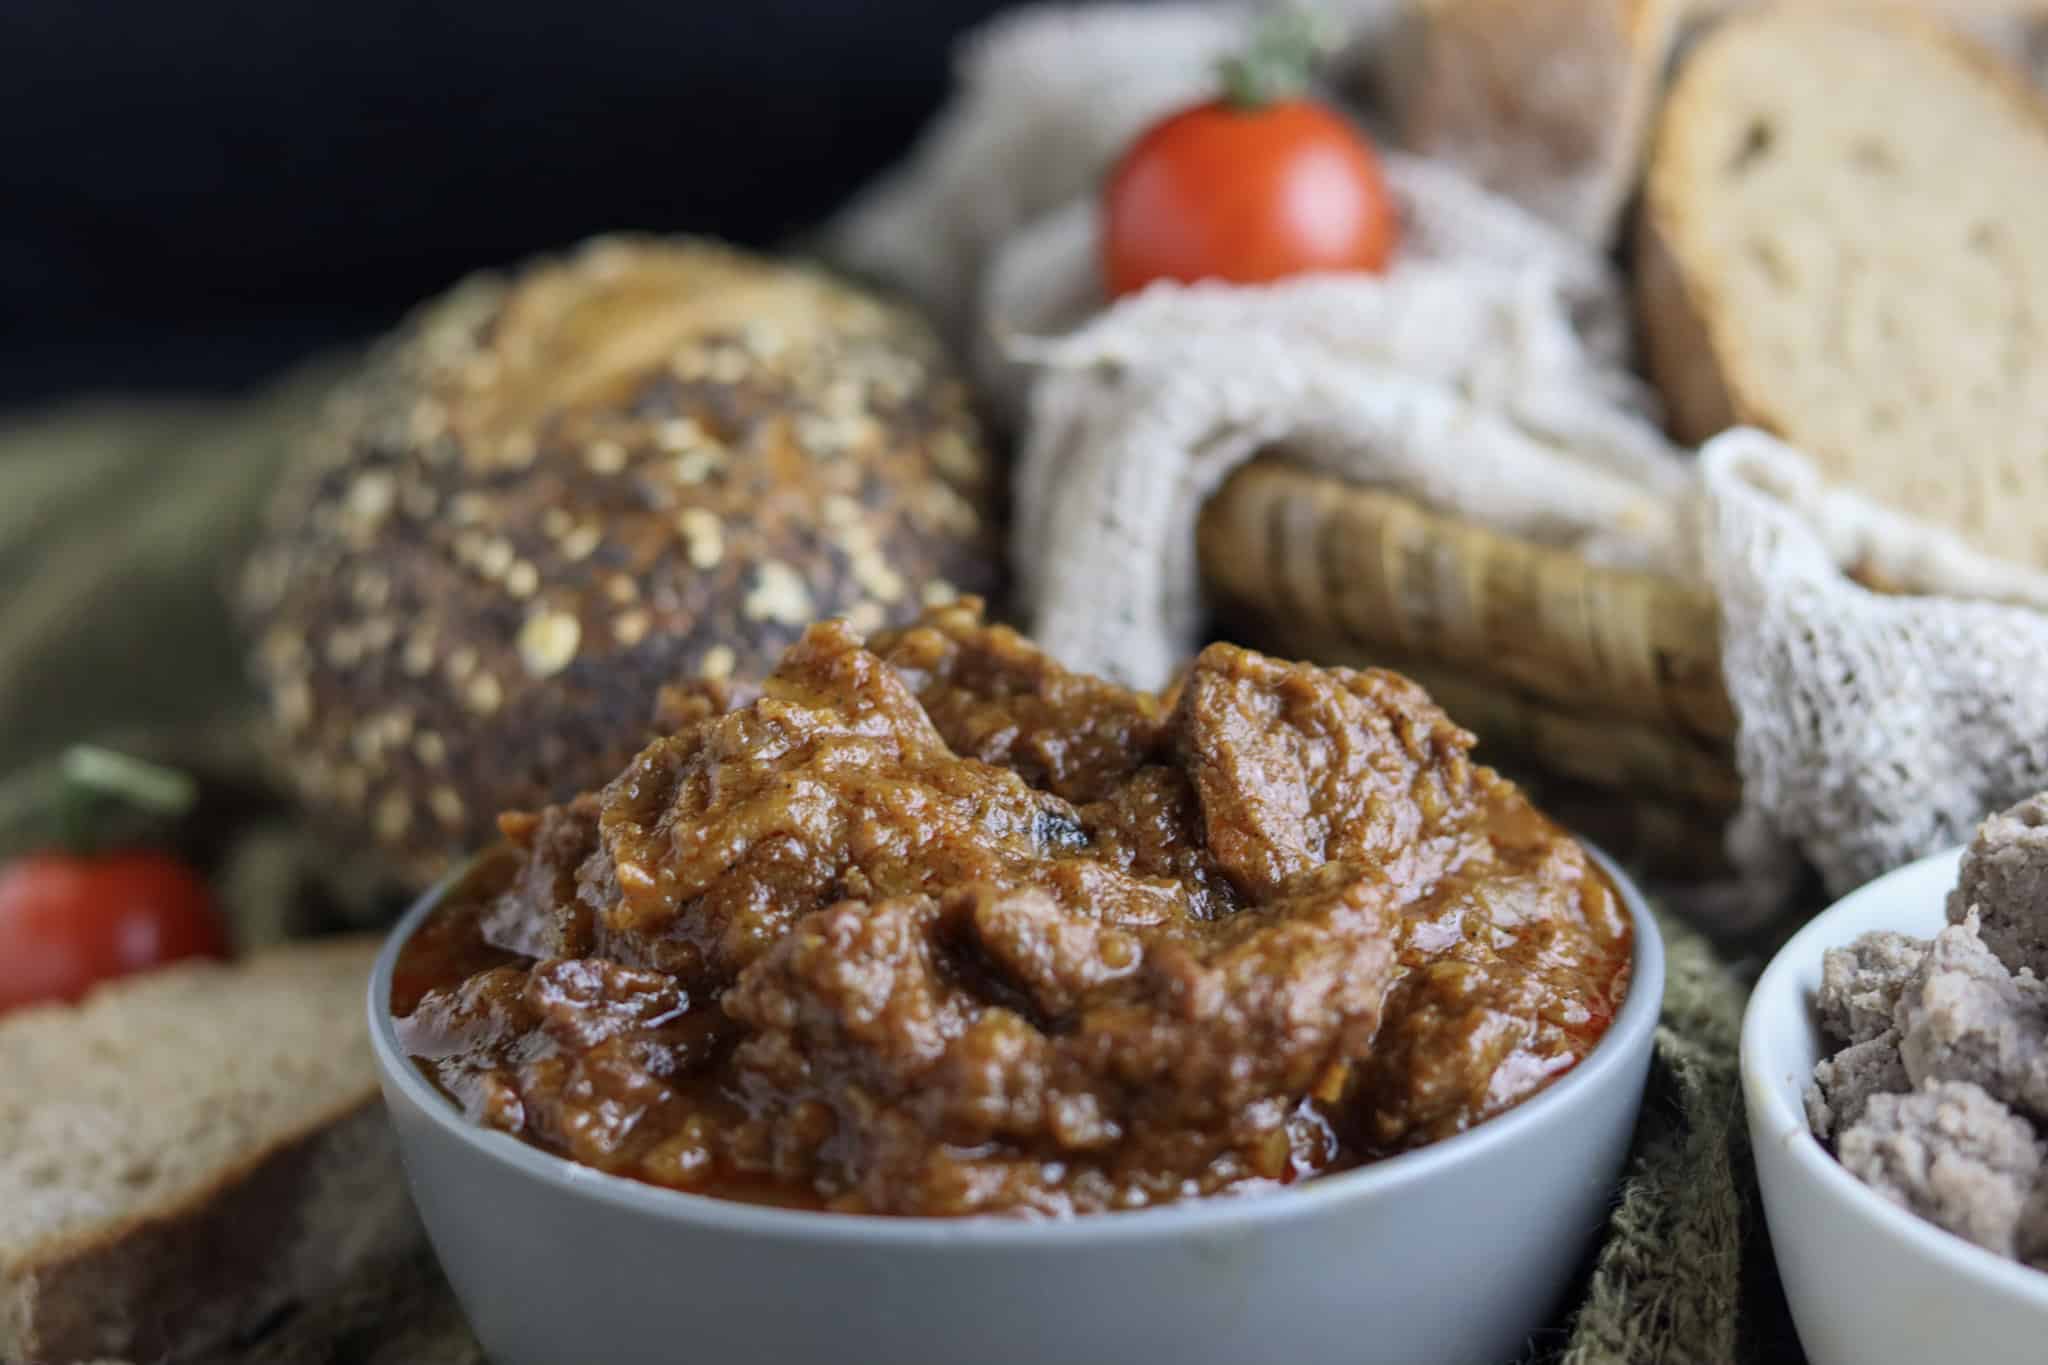 Authentic beef goulash, slow-cooked by the traditional recipe